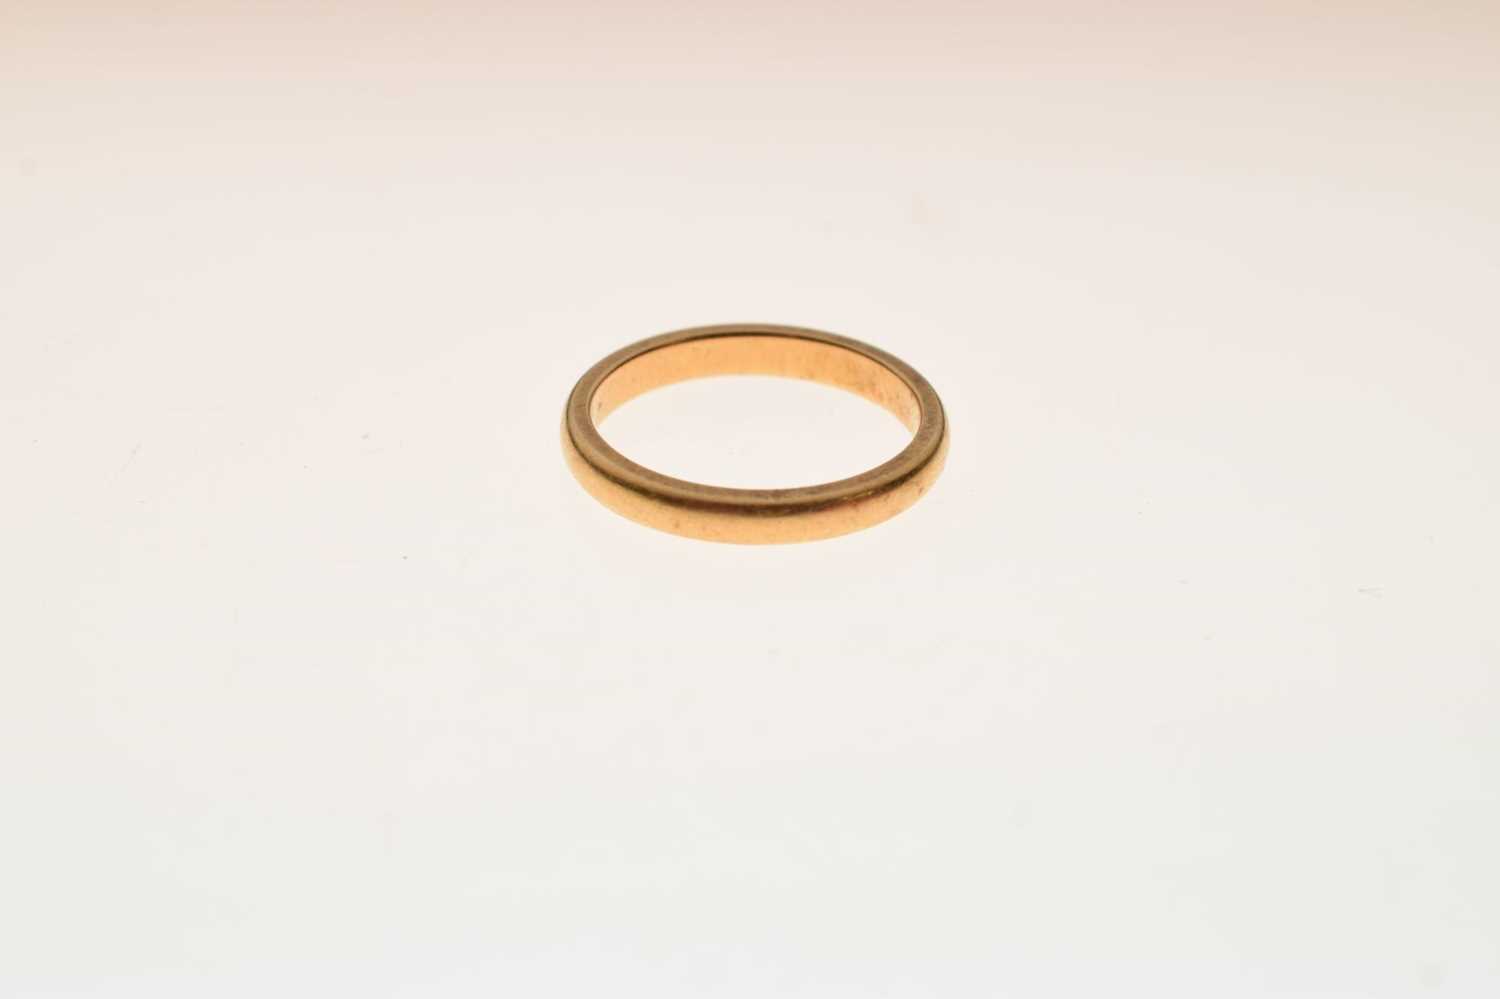 22ct gold 'D' section wedding band - Image 3 of 4